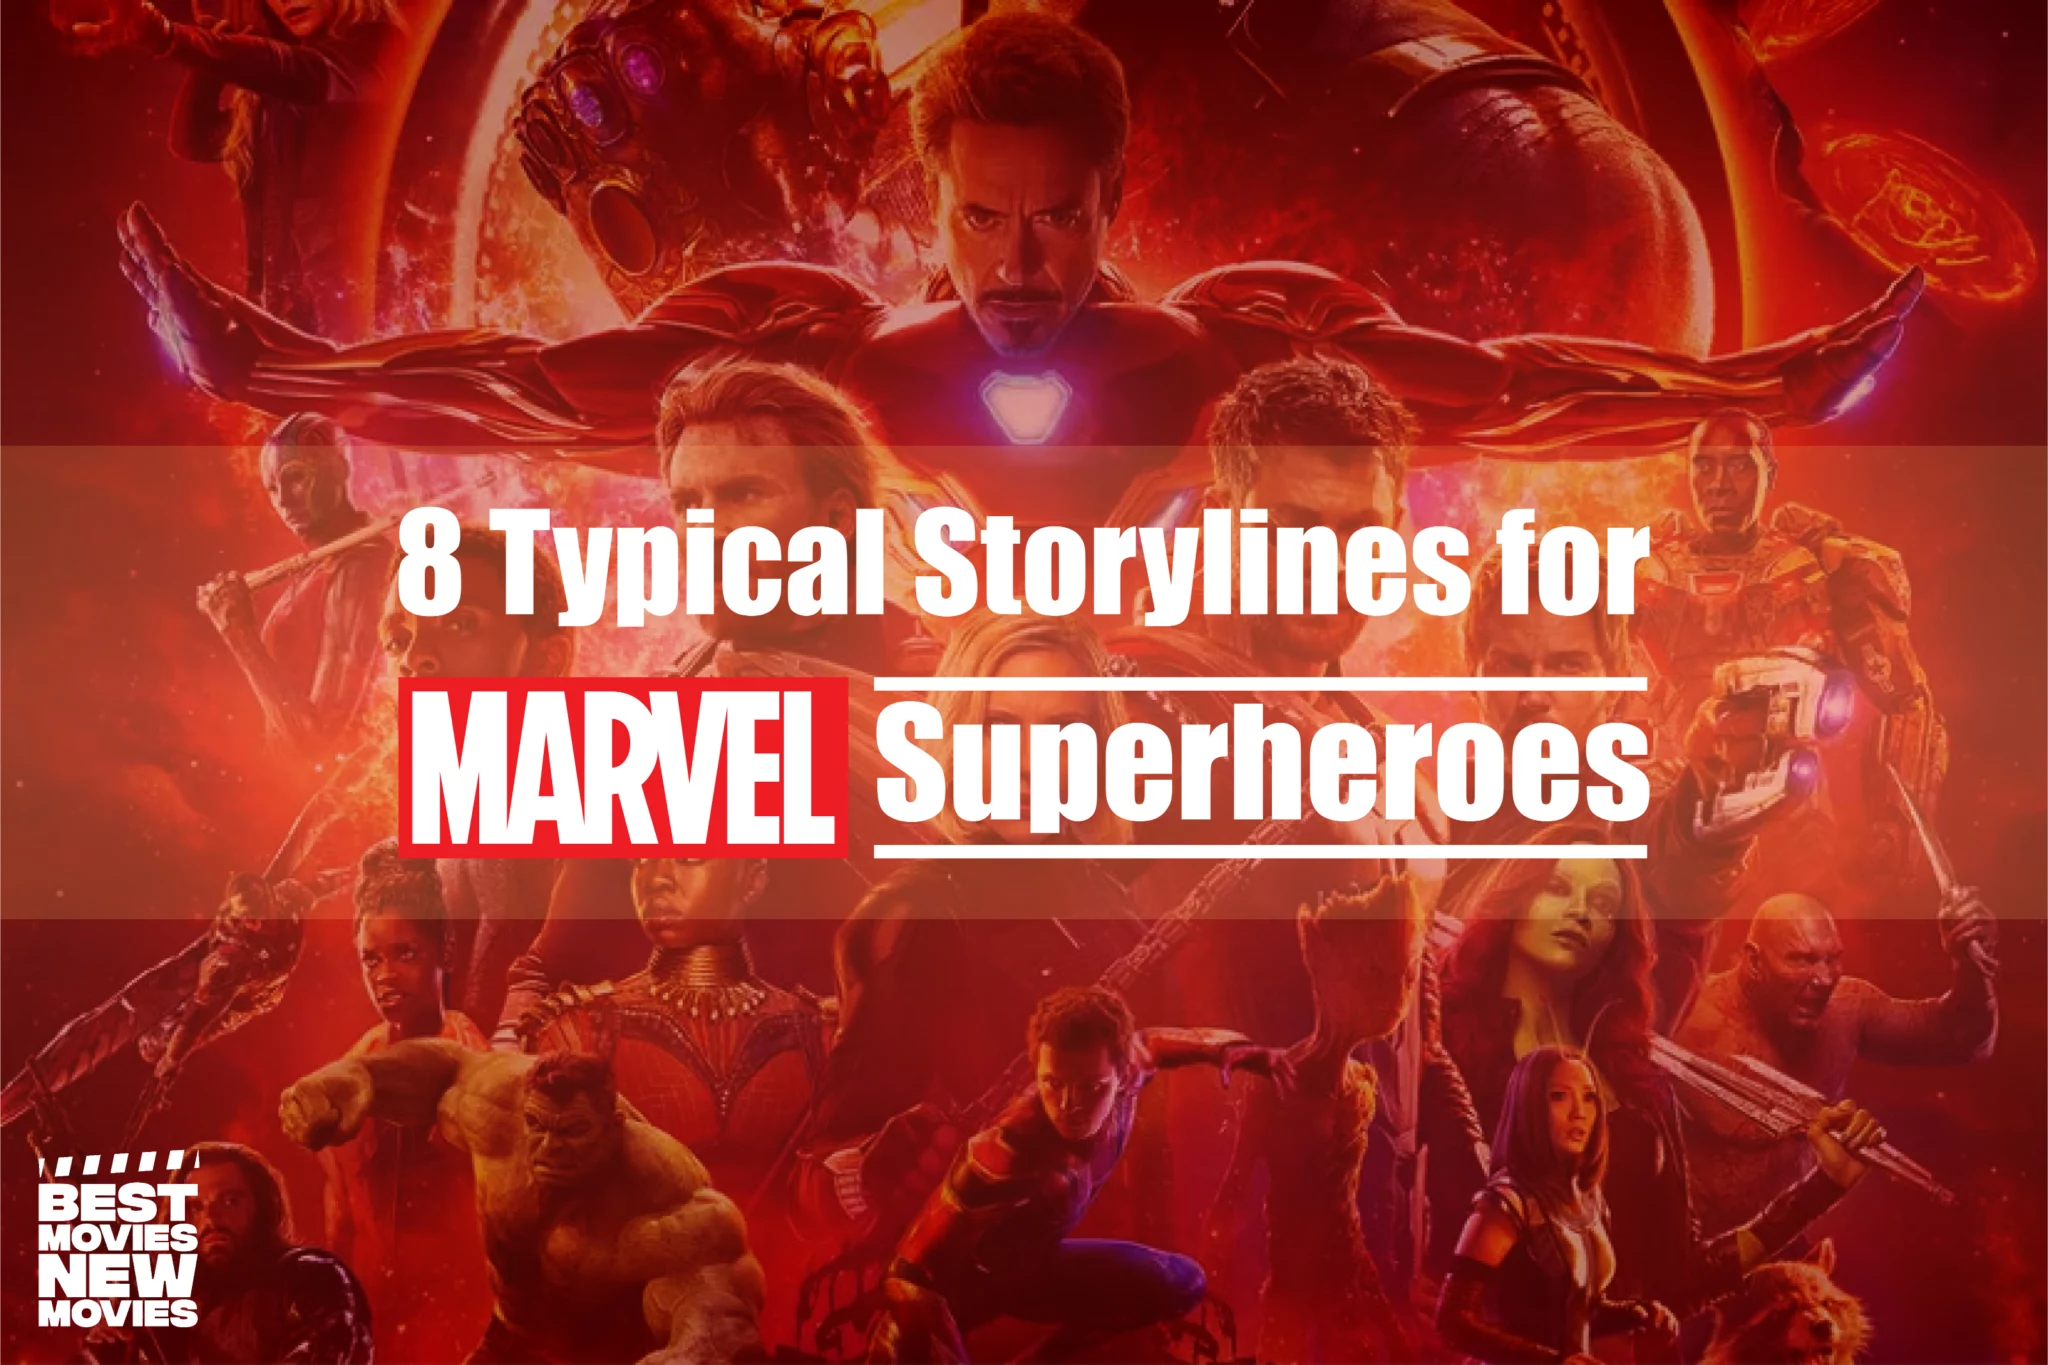 8 Typical Storylines for Marvel Superheroes